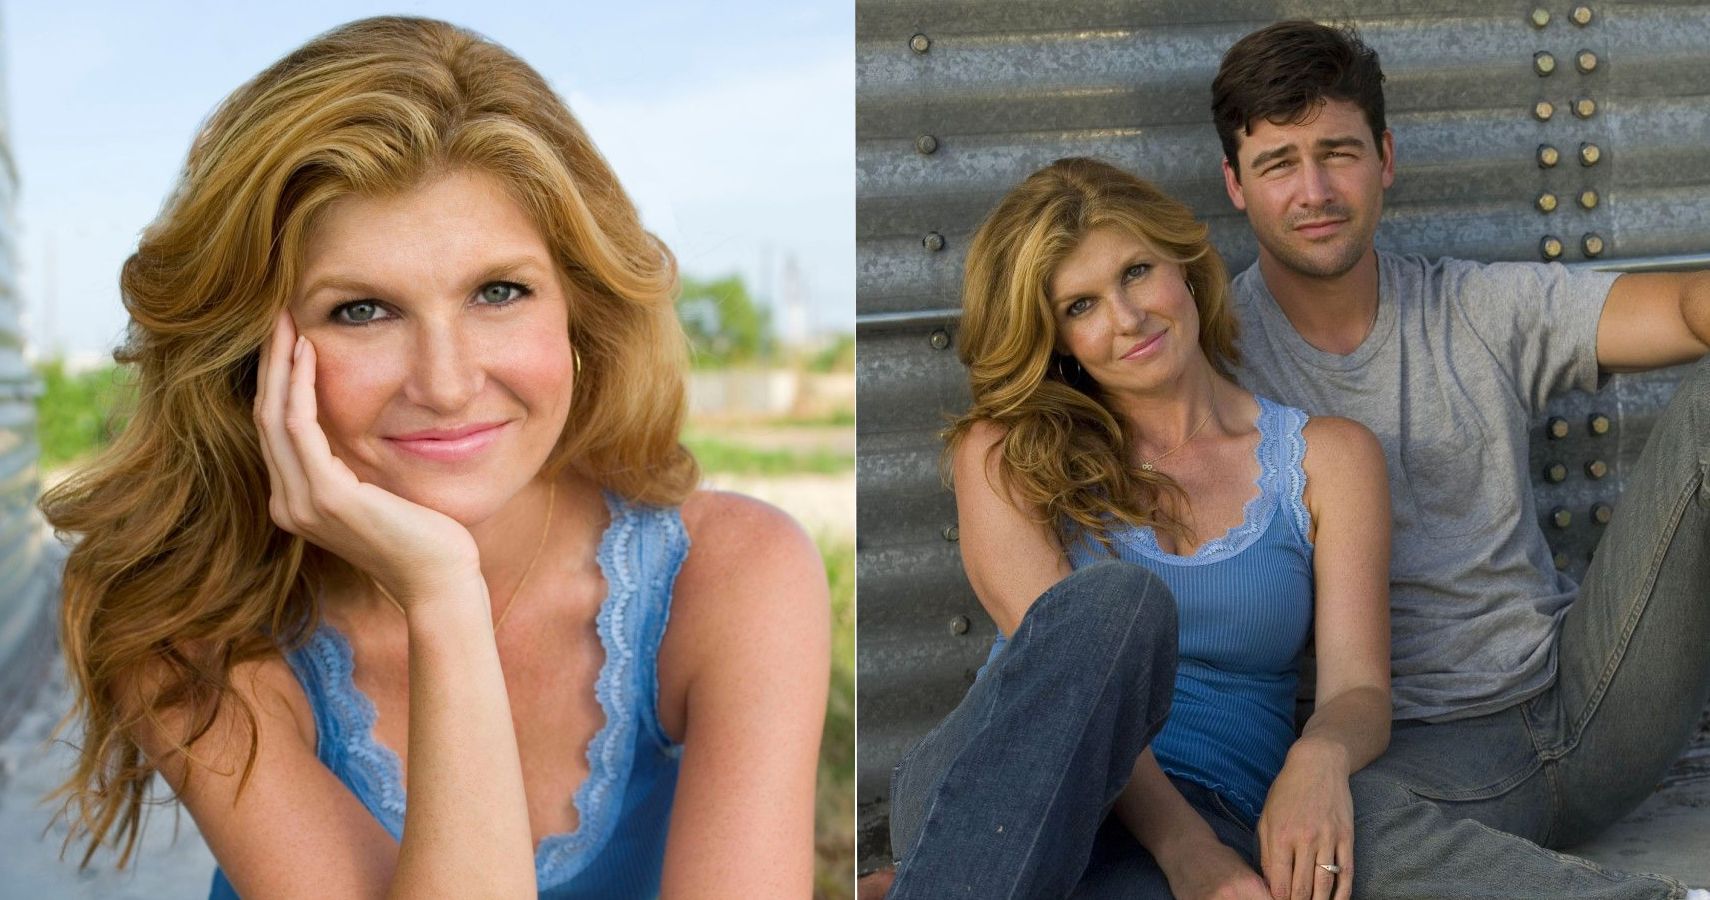 Friday Night Lights: Tami Taylor's 10 Most Inspirational Quotes